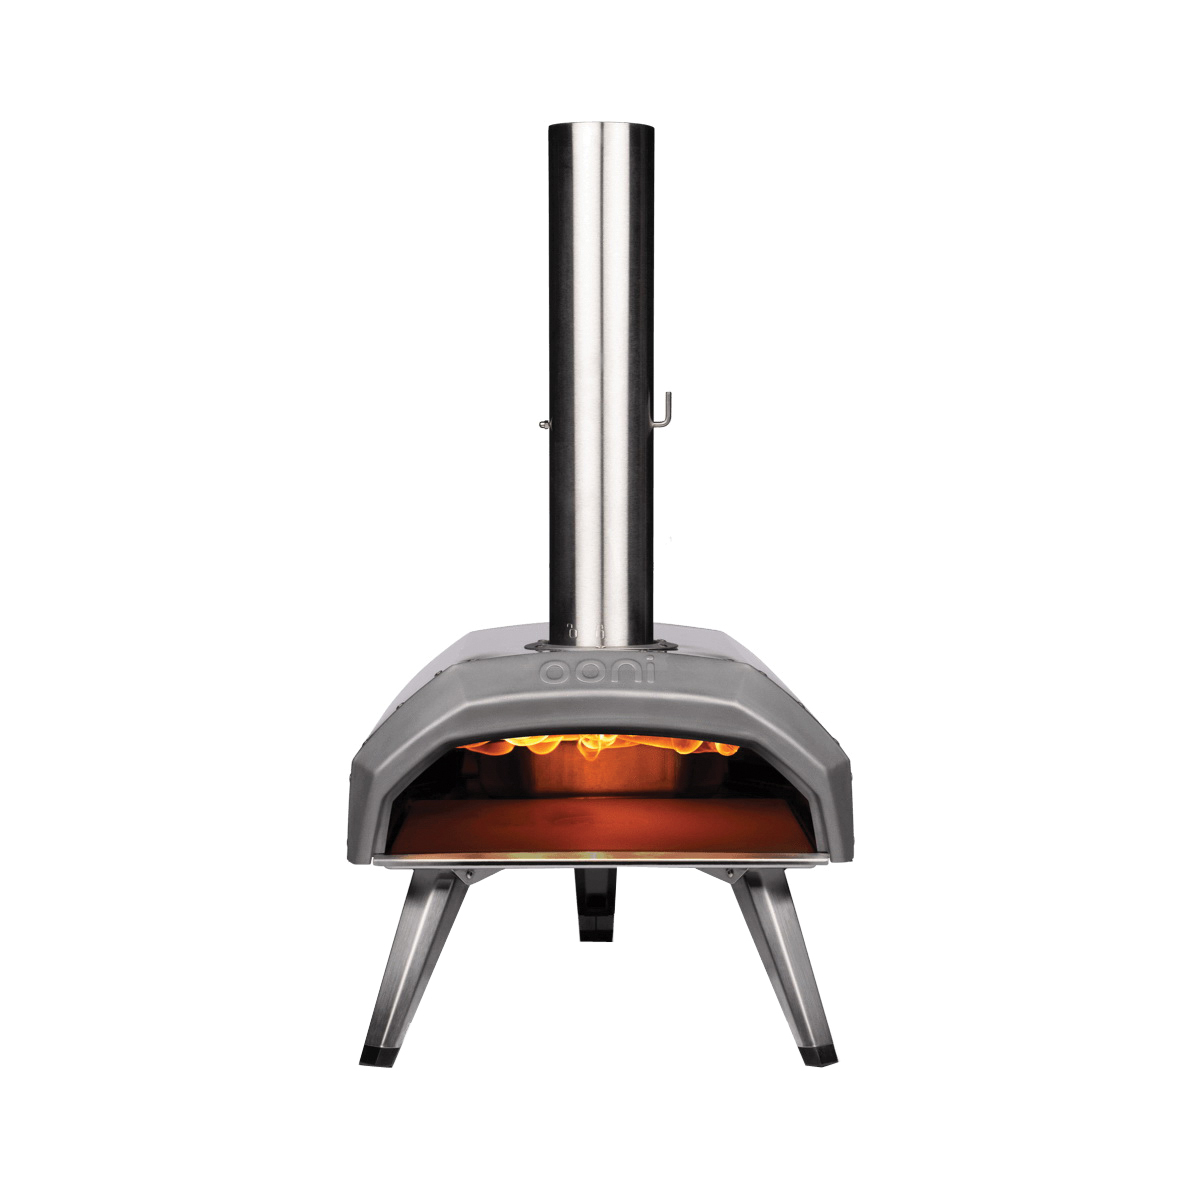 Ooni Karu 12 UU-POA100 Multi-Fuel Pizza Oven, 15.7 in W, 26.6 in D, 28.7 in H, Glass Reinforced Nylon/Stainless Steel - 3